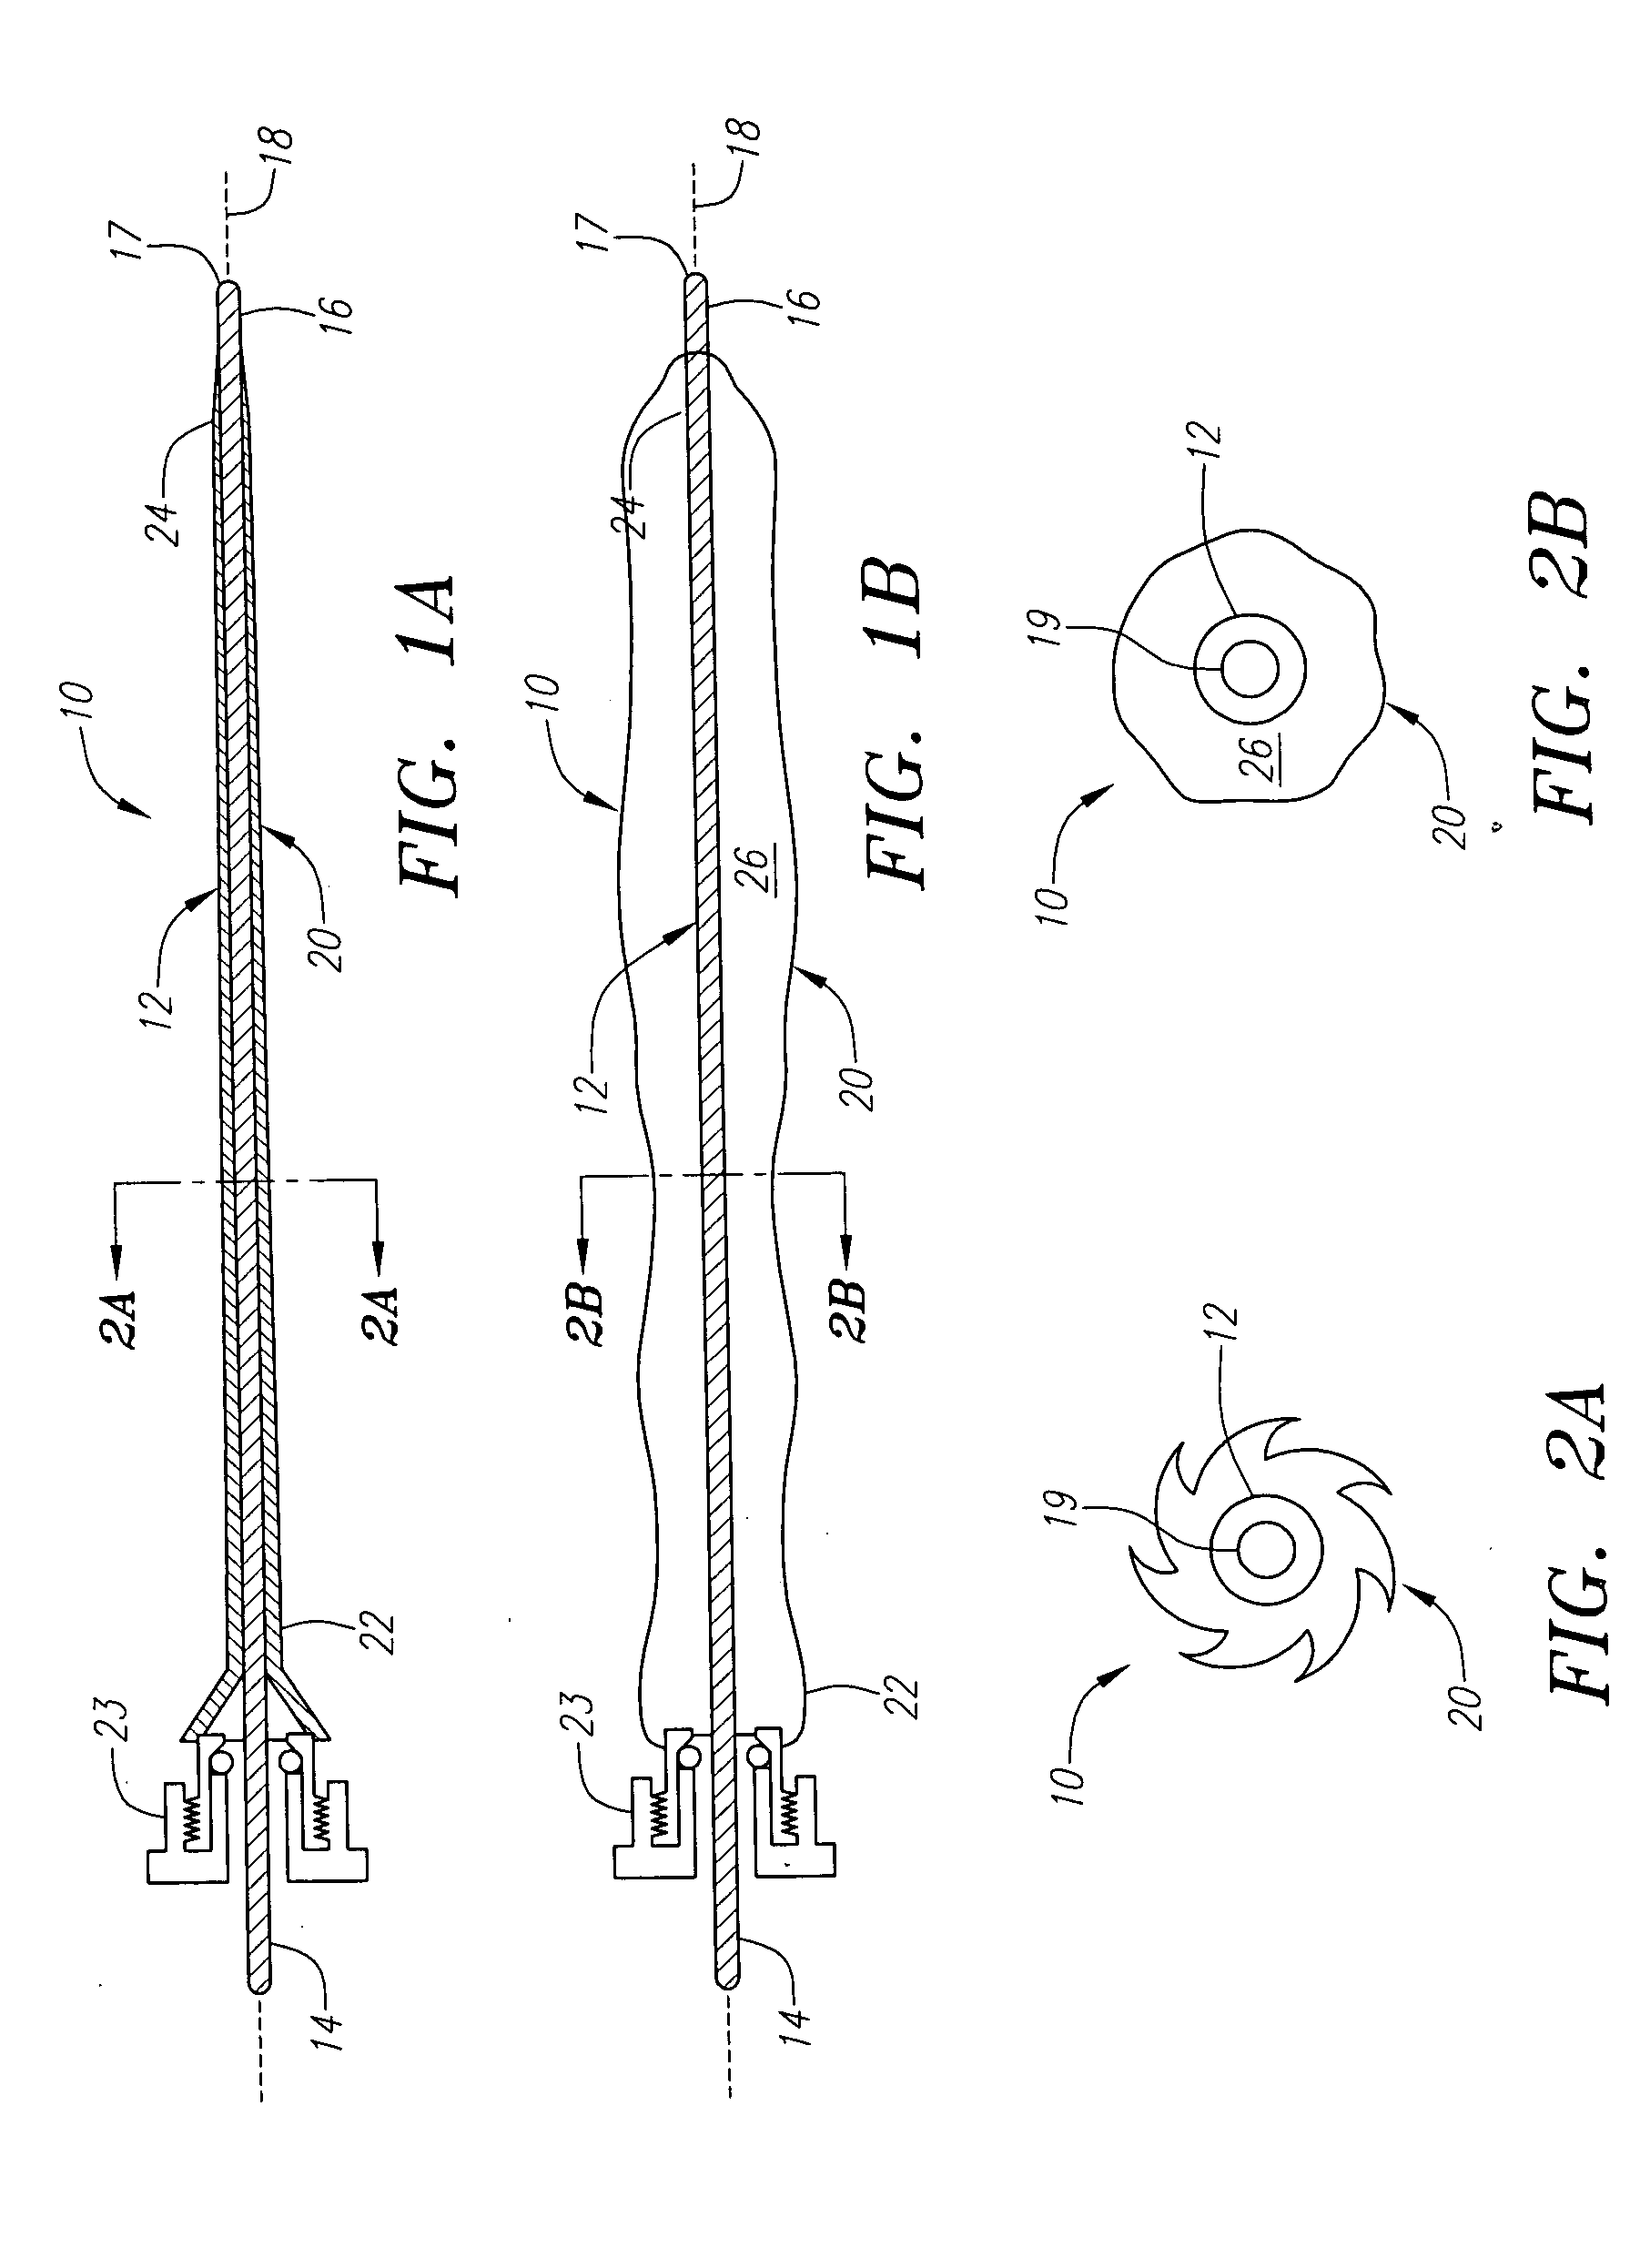 Expandable sheath for delivering instruments and agents into a body lumen and methods for use